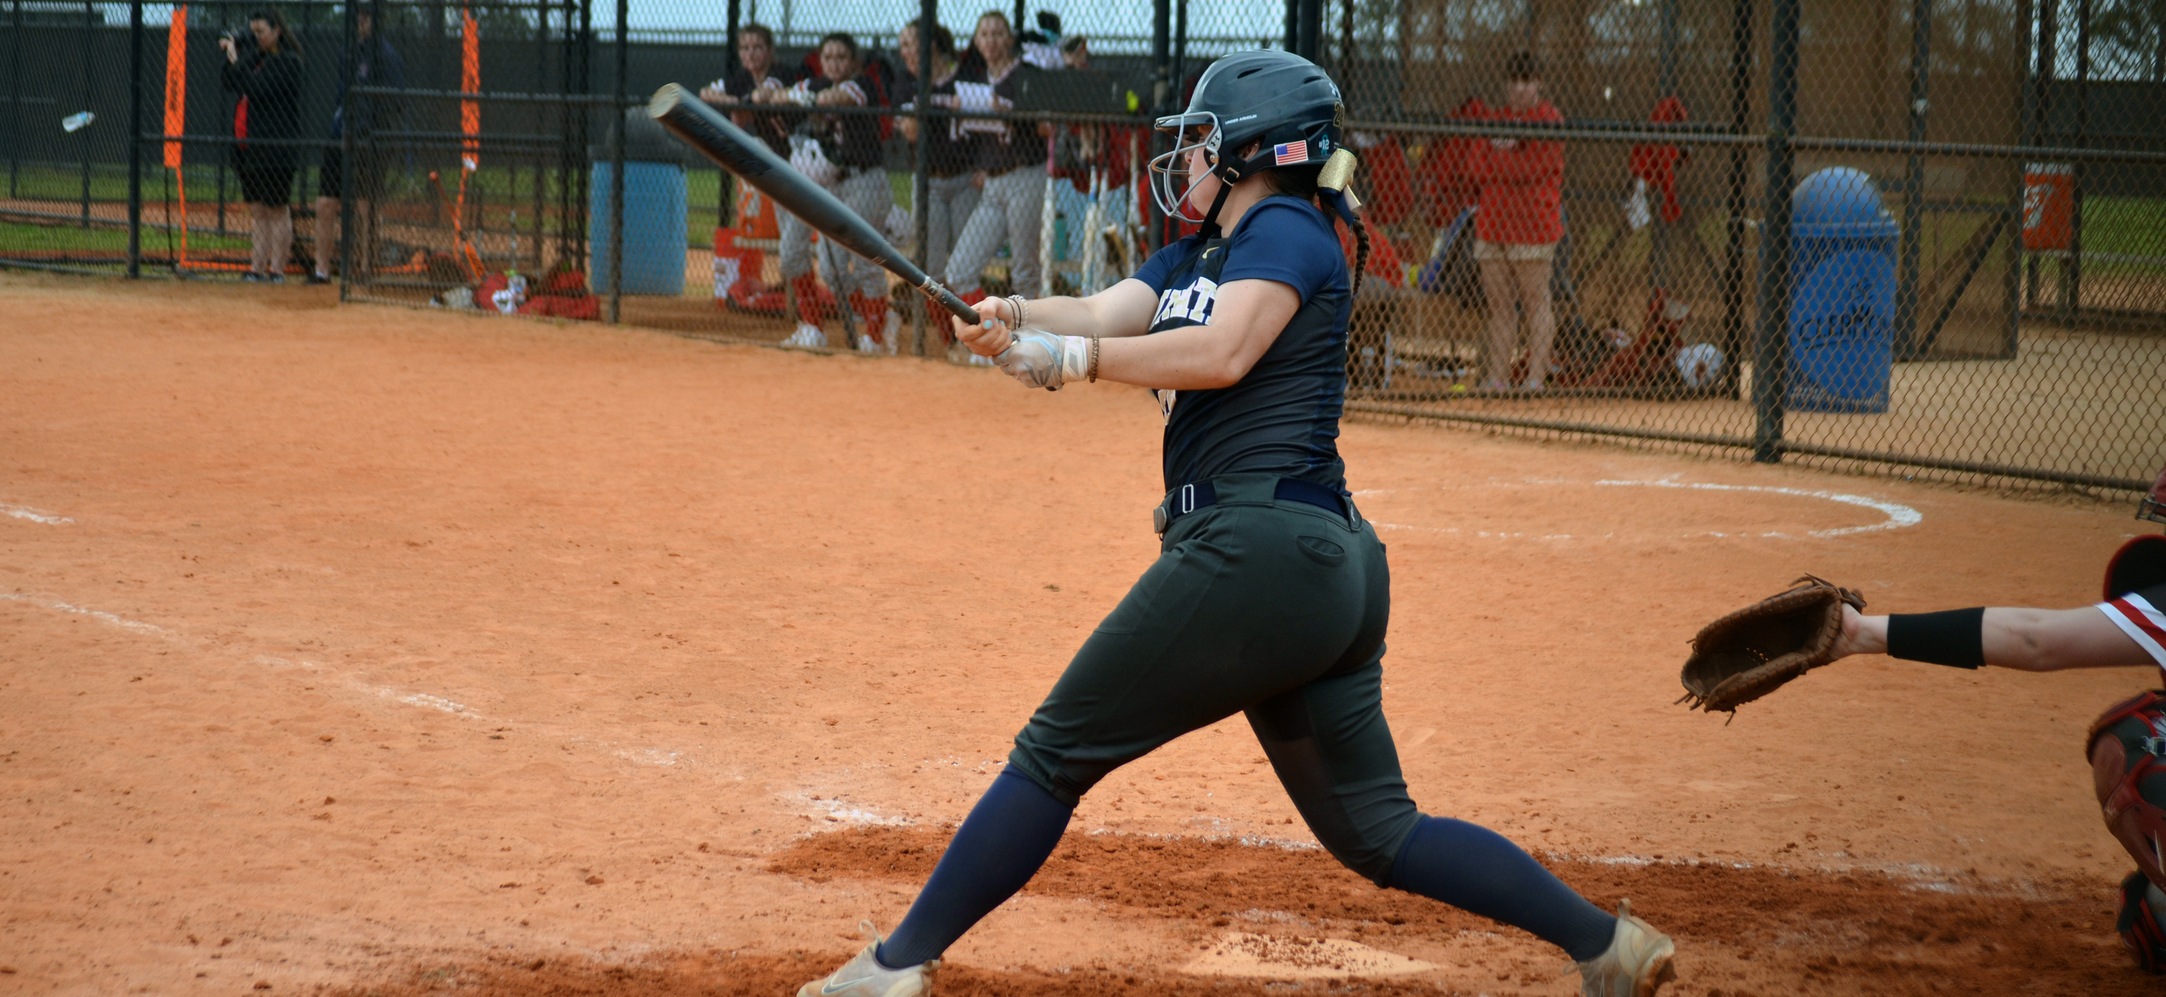 Ashley Clark went 1-1, with 2 RBI and a home run in the Eagles, 4-2 loss against St. Lawrence.